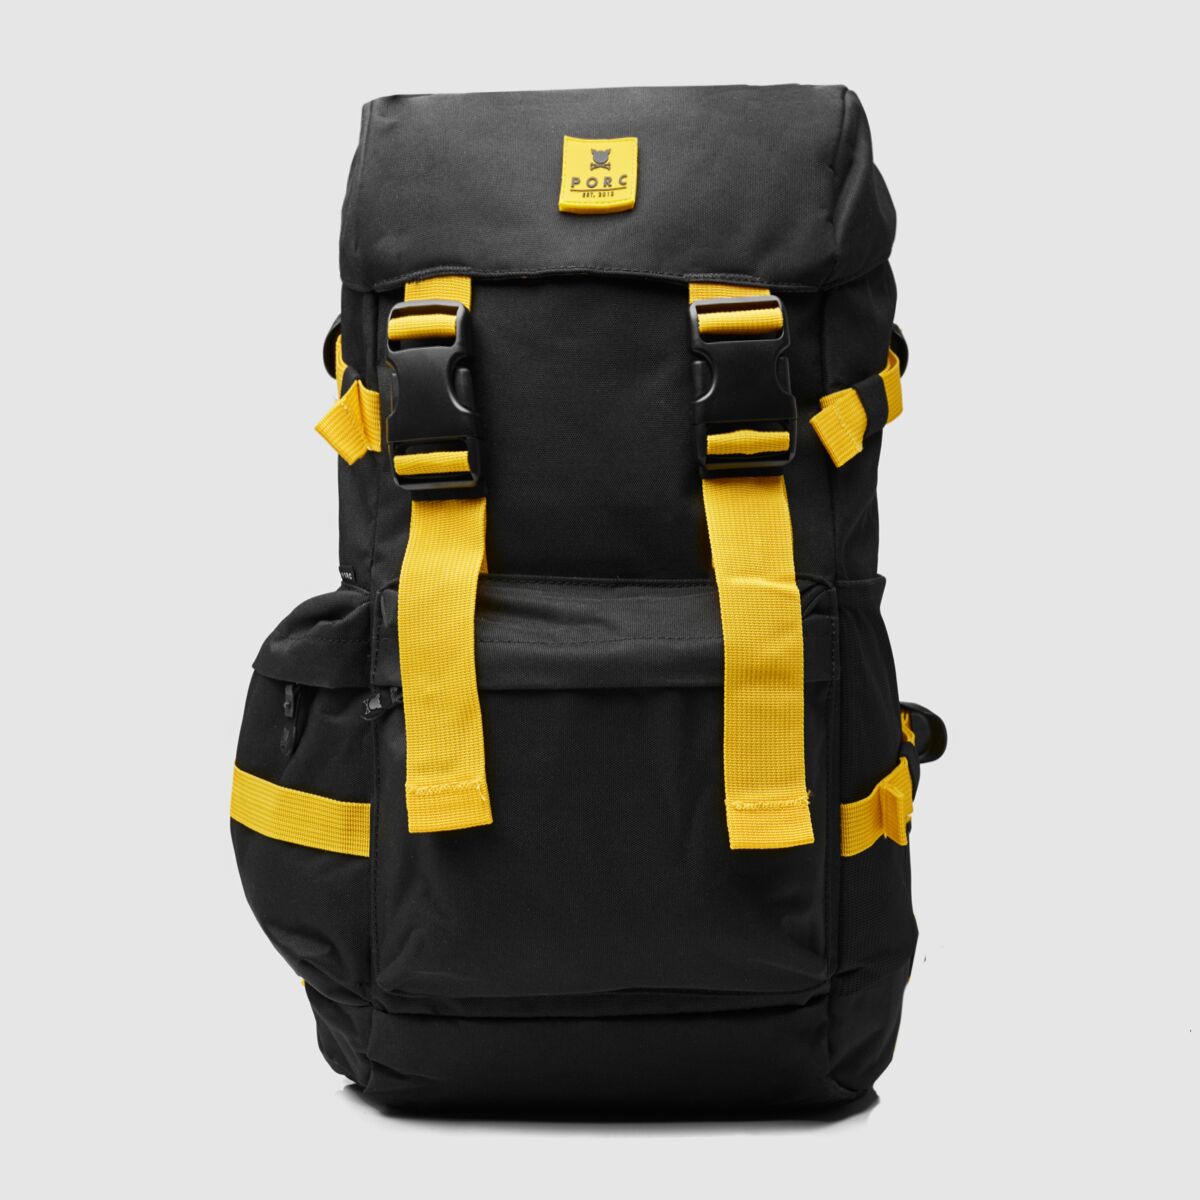 Custodian Institute equality Summit" Backpack